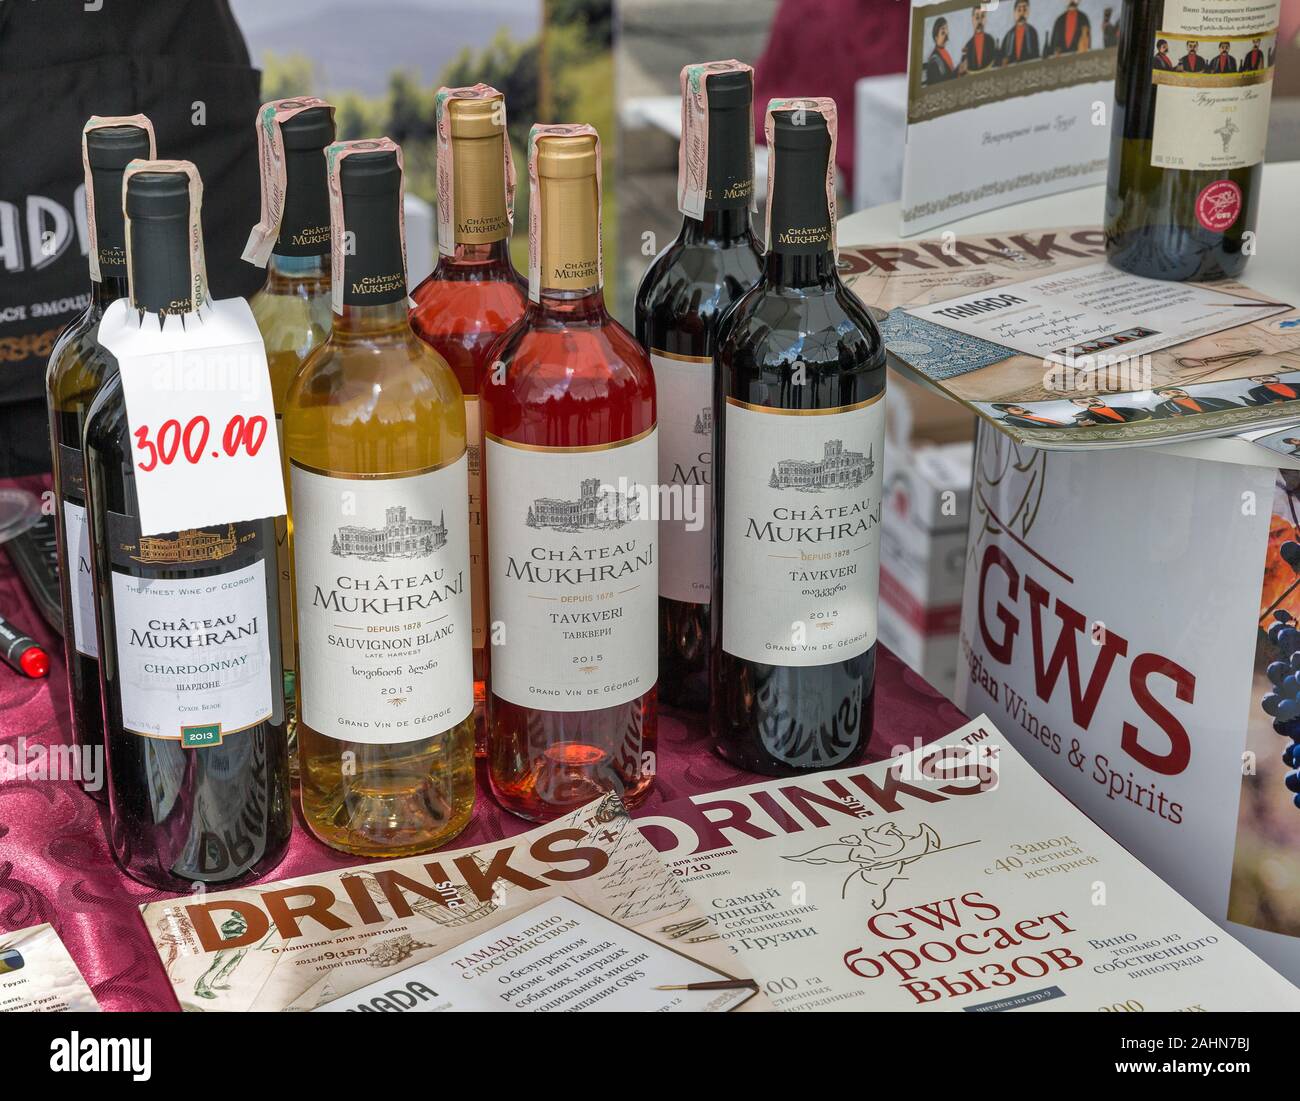 KYIV, UKRAINE - MAY 19, 2018: Chateau Mukhrani Georgian wine booth during Food and Wine Festival in National Expocenter, a permanent multi-purpose exh Stock Photo